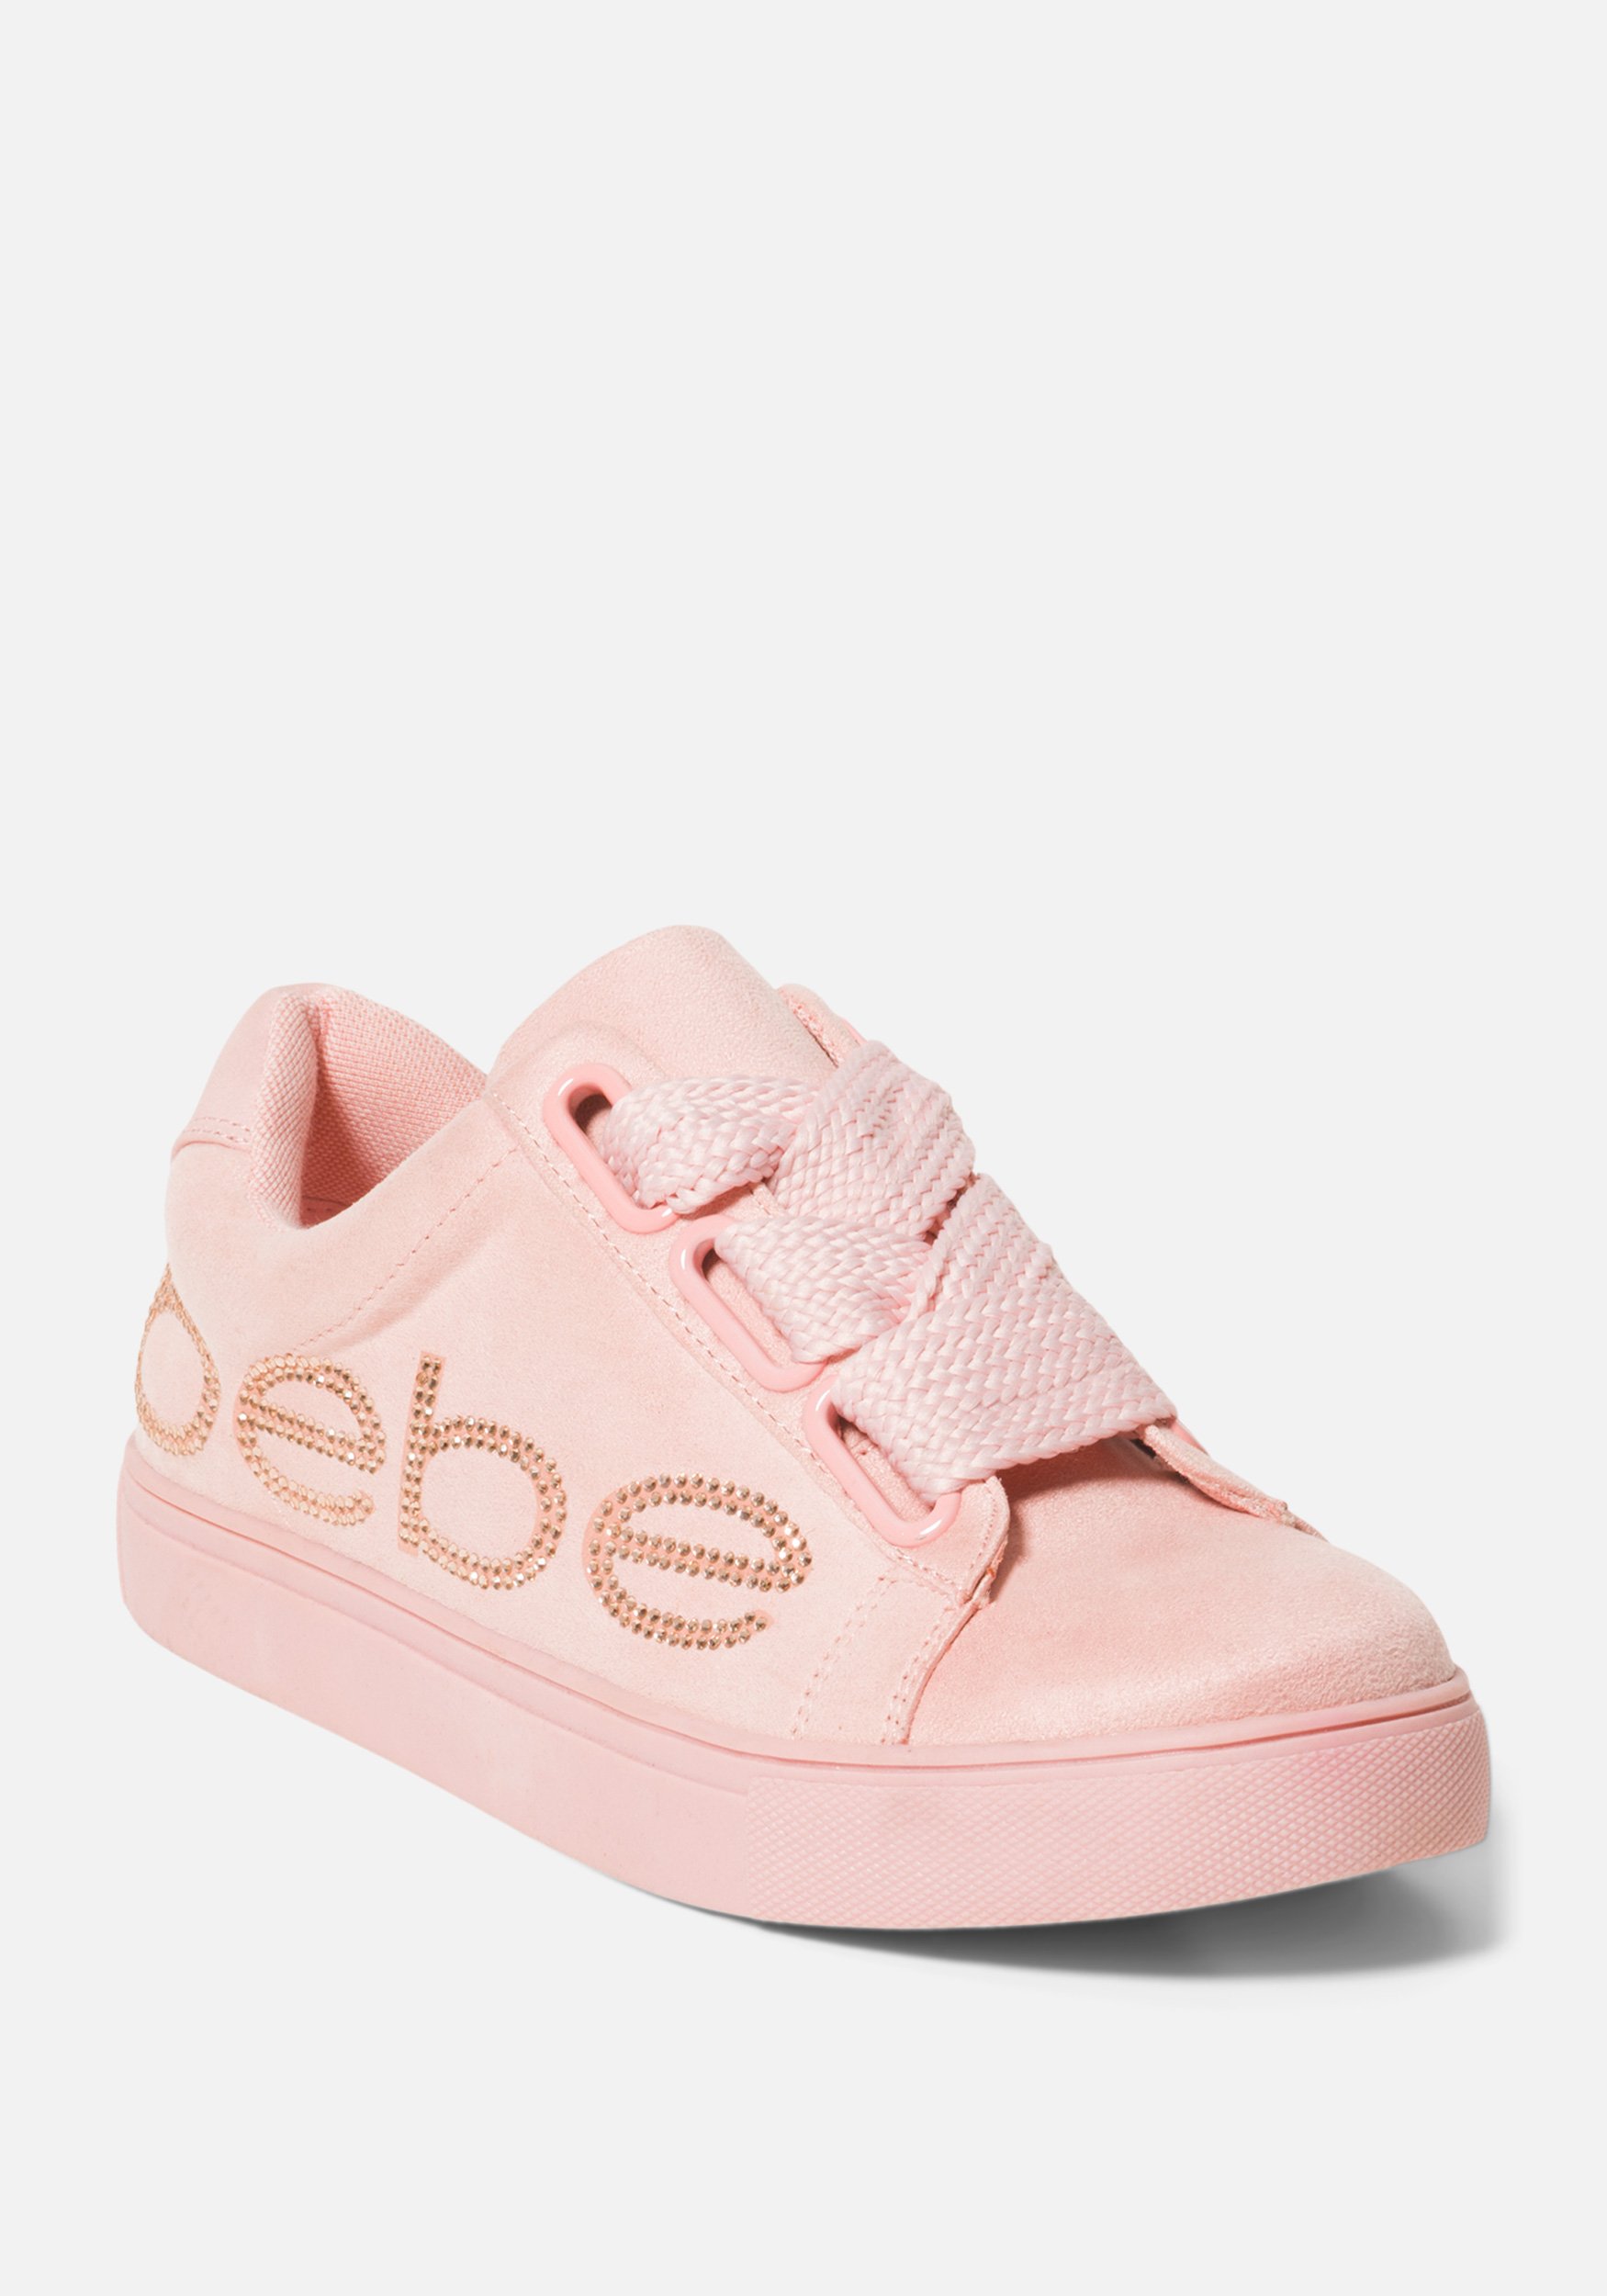 Women's Cabree Bebe Logo Sneakers, Size 10.5 in Pink Synthetic